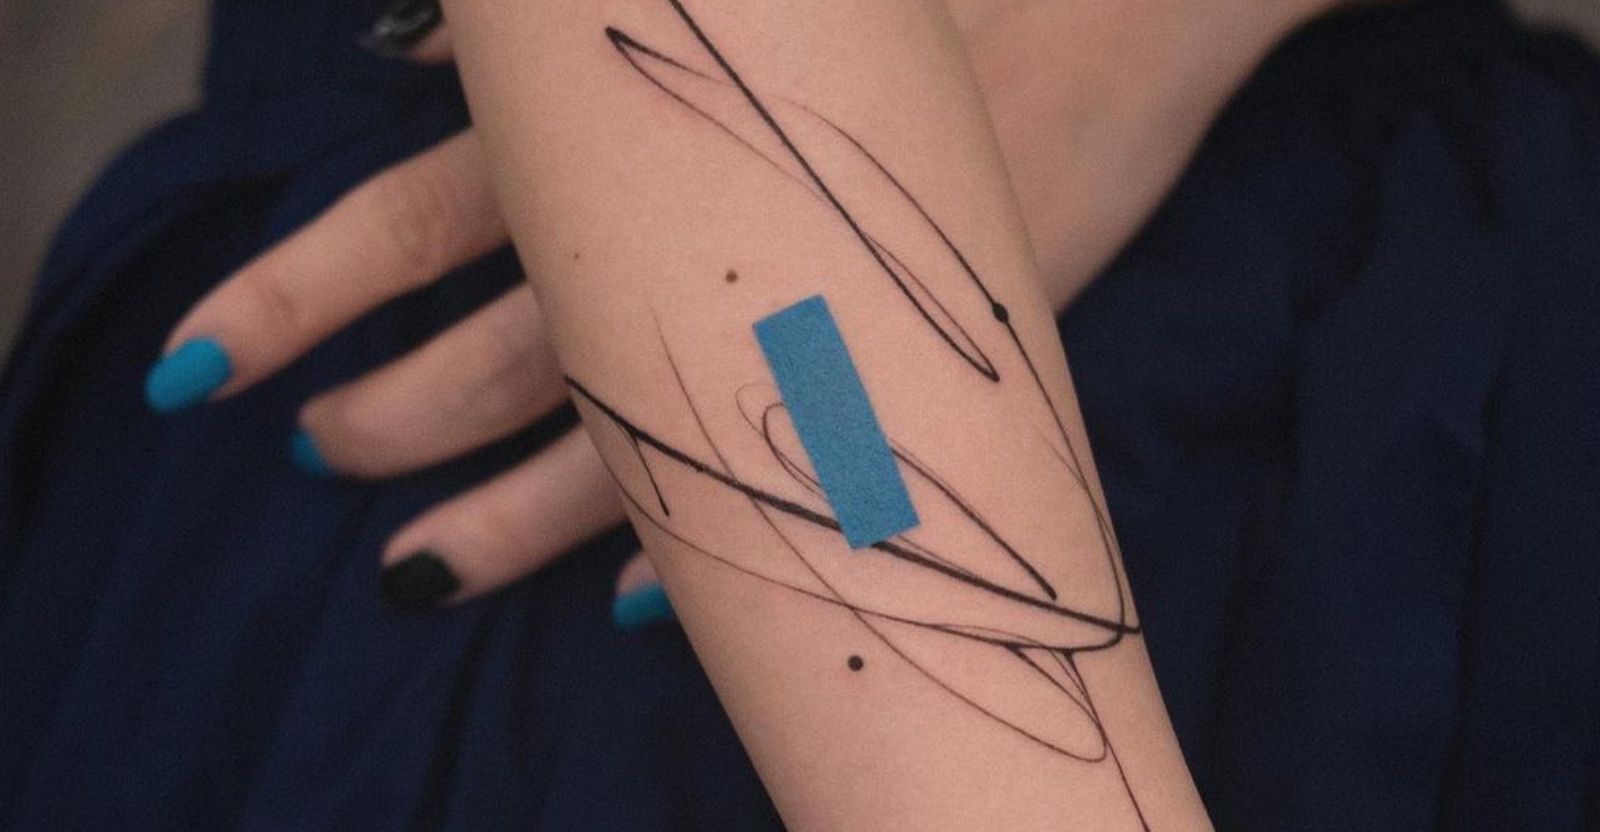 What are the best minimalist tattoos? - Quora